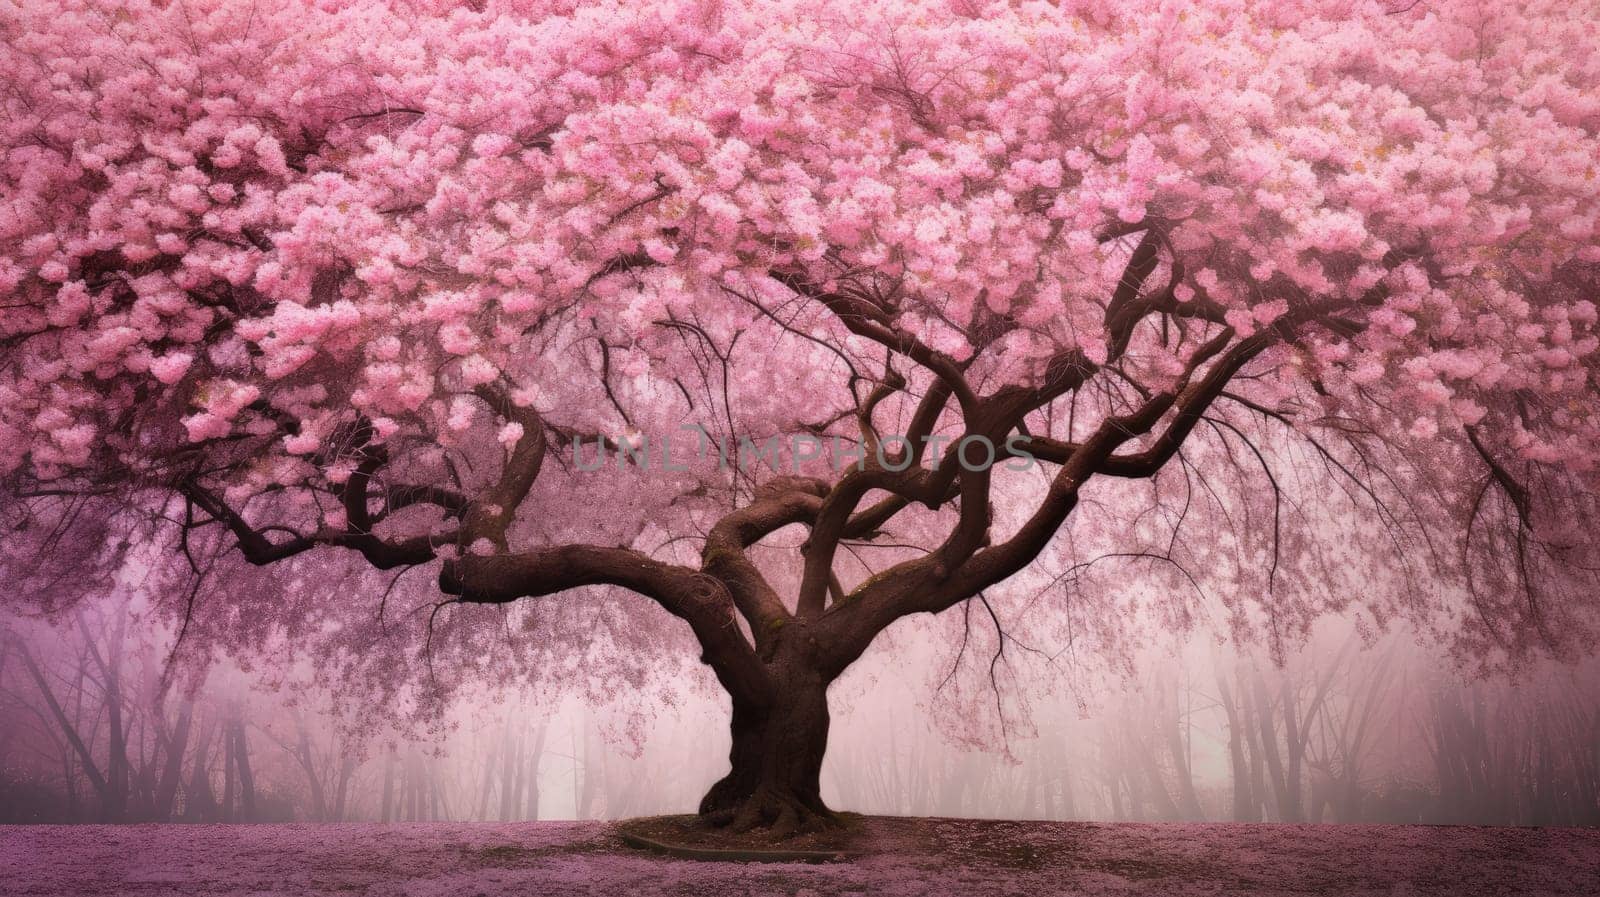 A magnificent cherry blossom tree in full bloom, its branches adorned with an abundance of delicate pink flowers